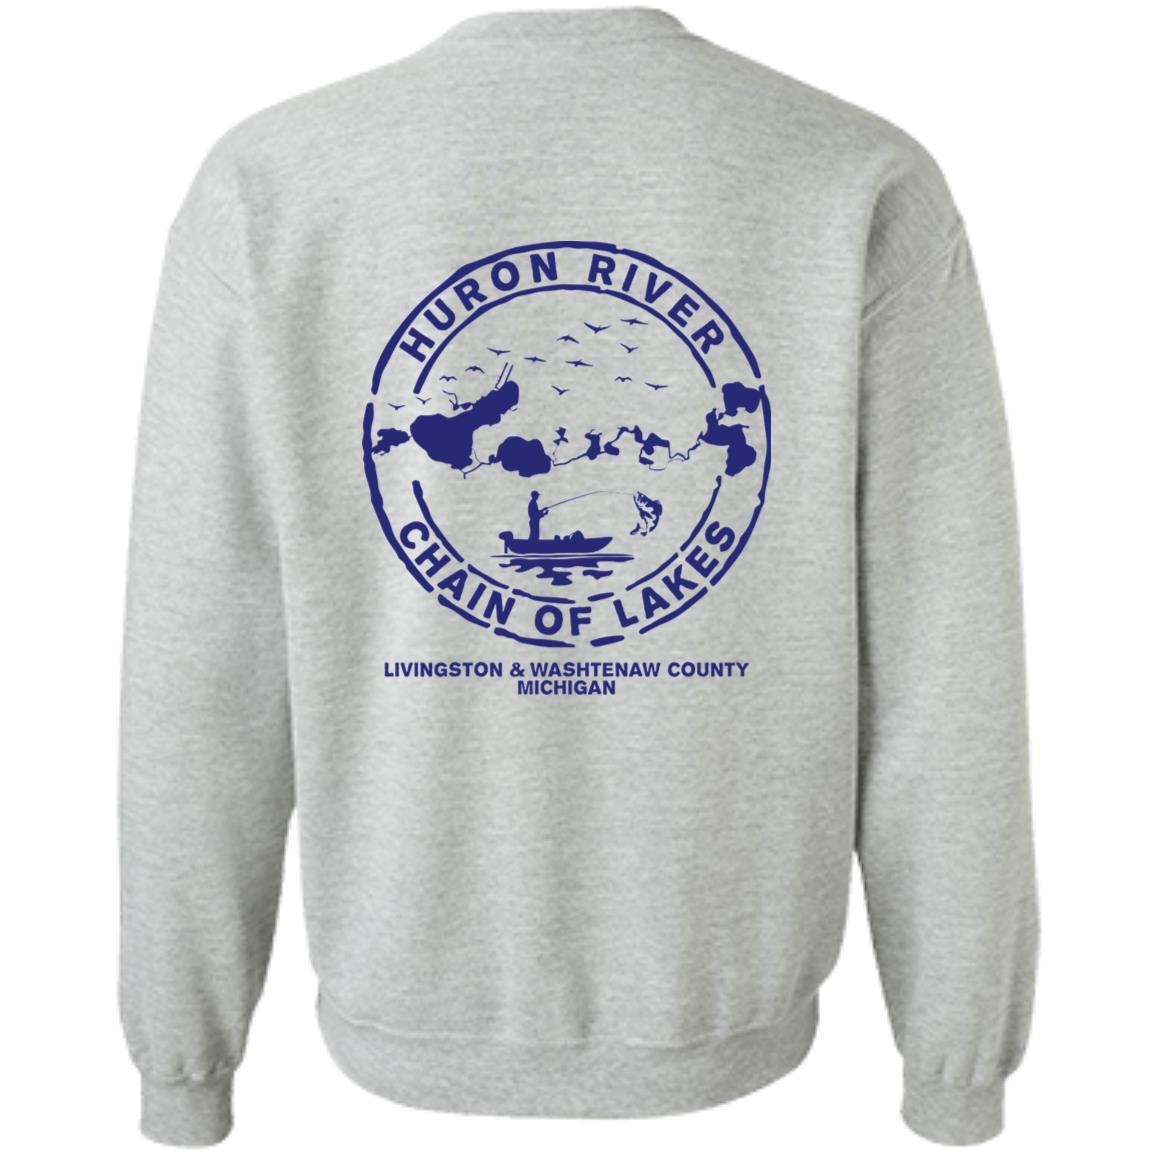 ***2 SIDED***  HRCL FL - Navy Boat.... Bust Out Another Thousand - 2 Sided G180 Crewneck Pullover Sweatshirt